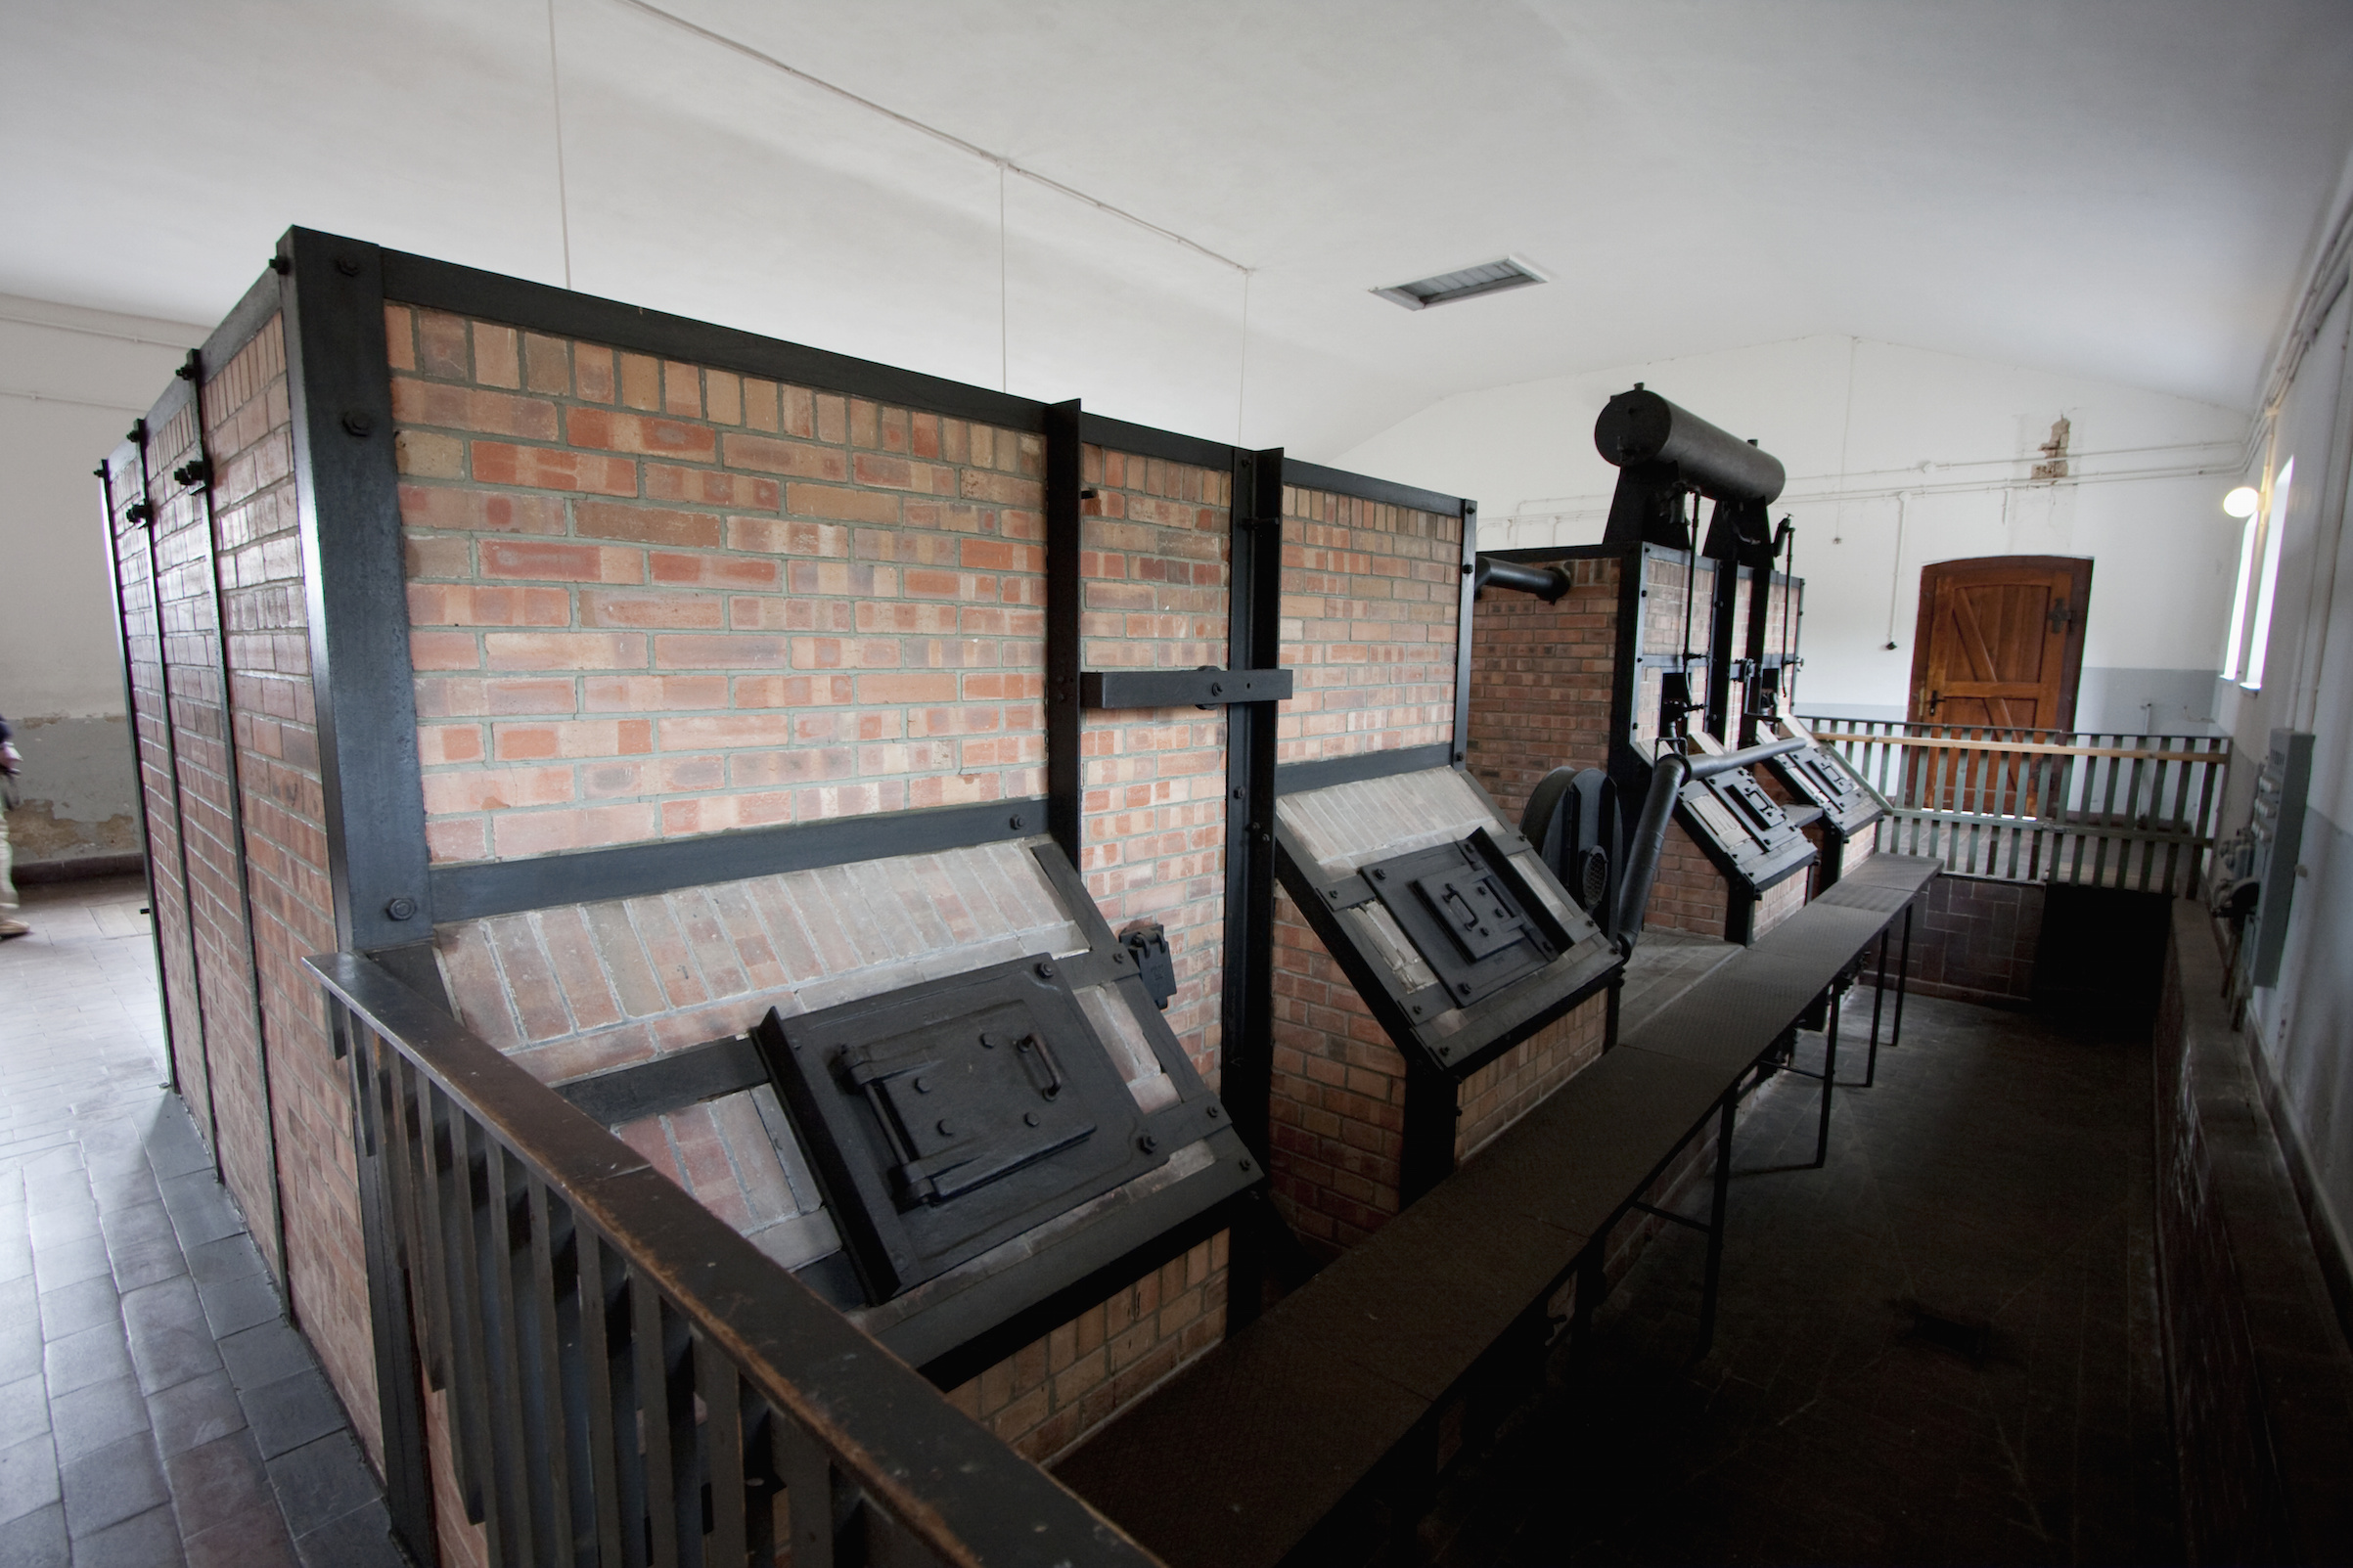 Ovens By Topf &amp; Sohne In The Crematorium, Buchenwald Concentration Camp, Germany (Photo by: Insights/UIG via Getty Images) (Insight/UIG/Getty Images)